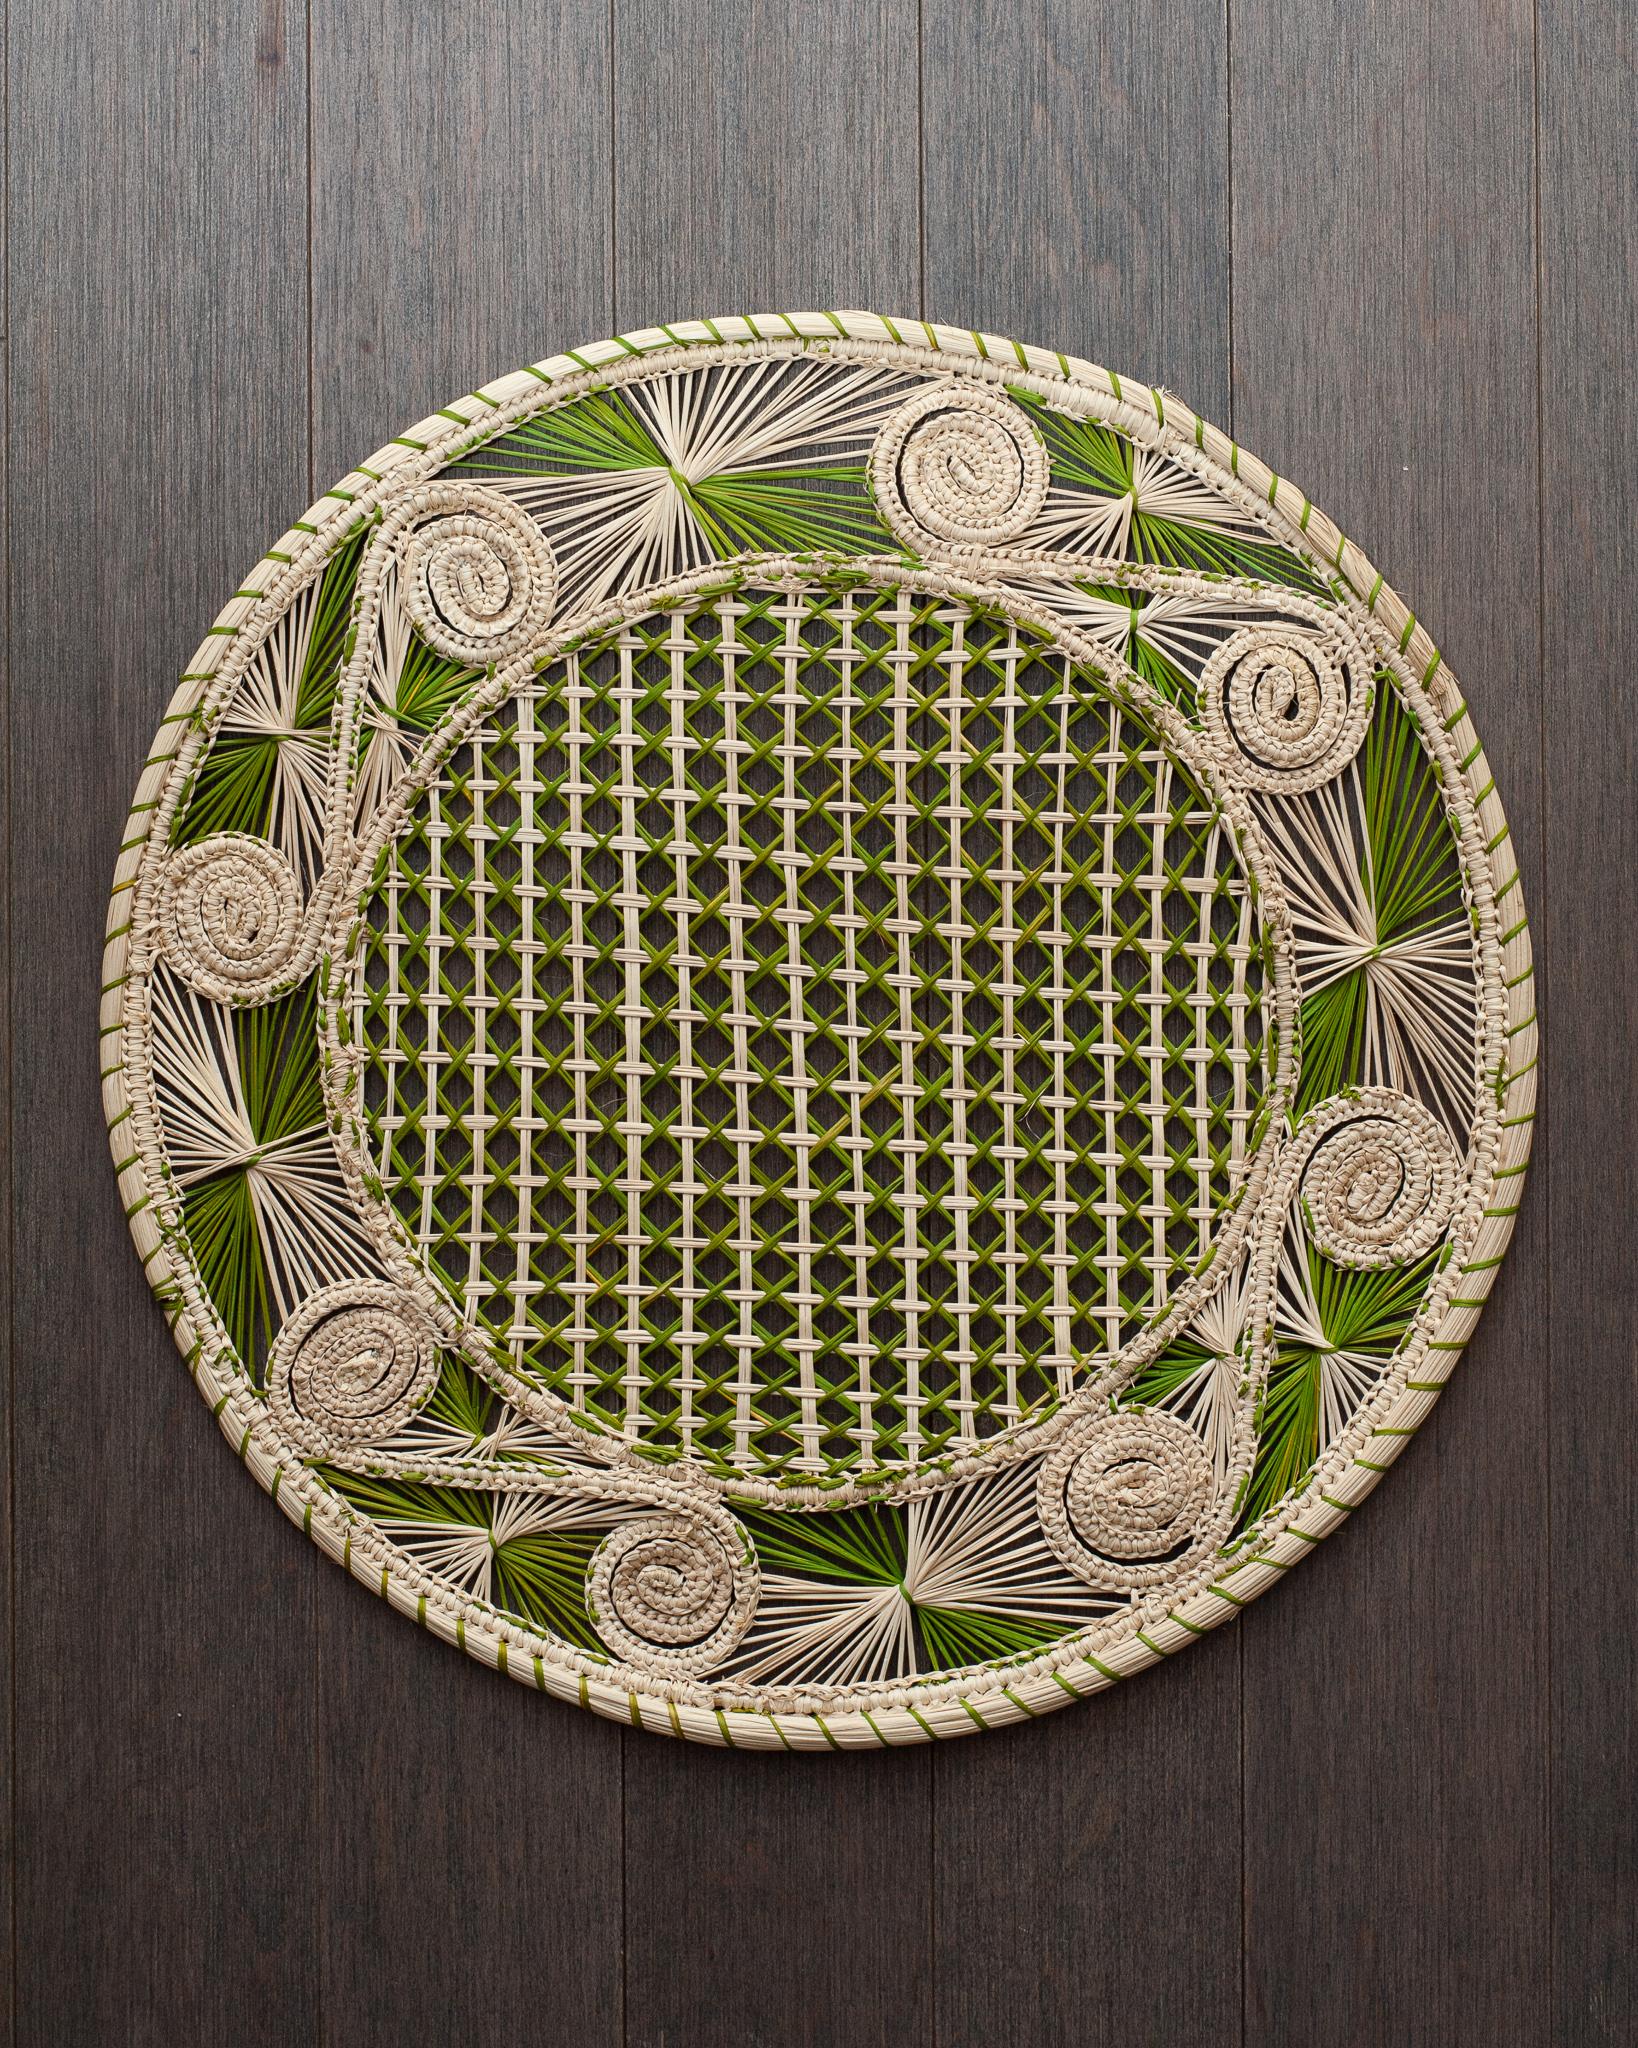 Uplift your table with these stunning handwoven rattan placemats in natural and green rattan. Finely crafted by expert artisans, these pieces all showcase the classical technique of weaving in a modern way. From Jean Michel Frank to the House of